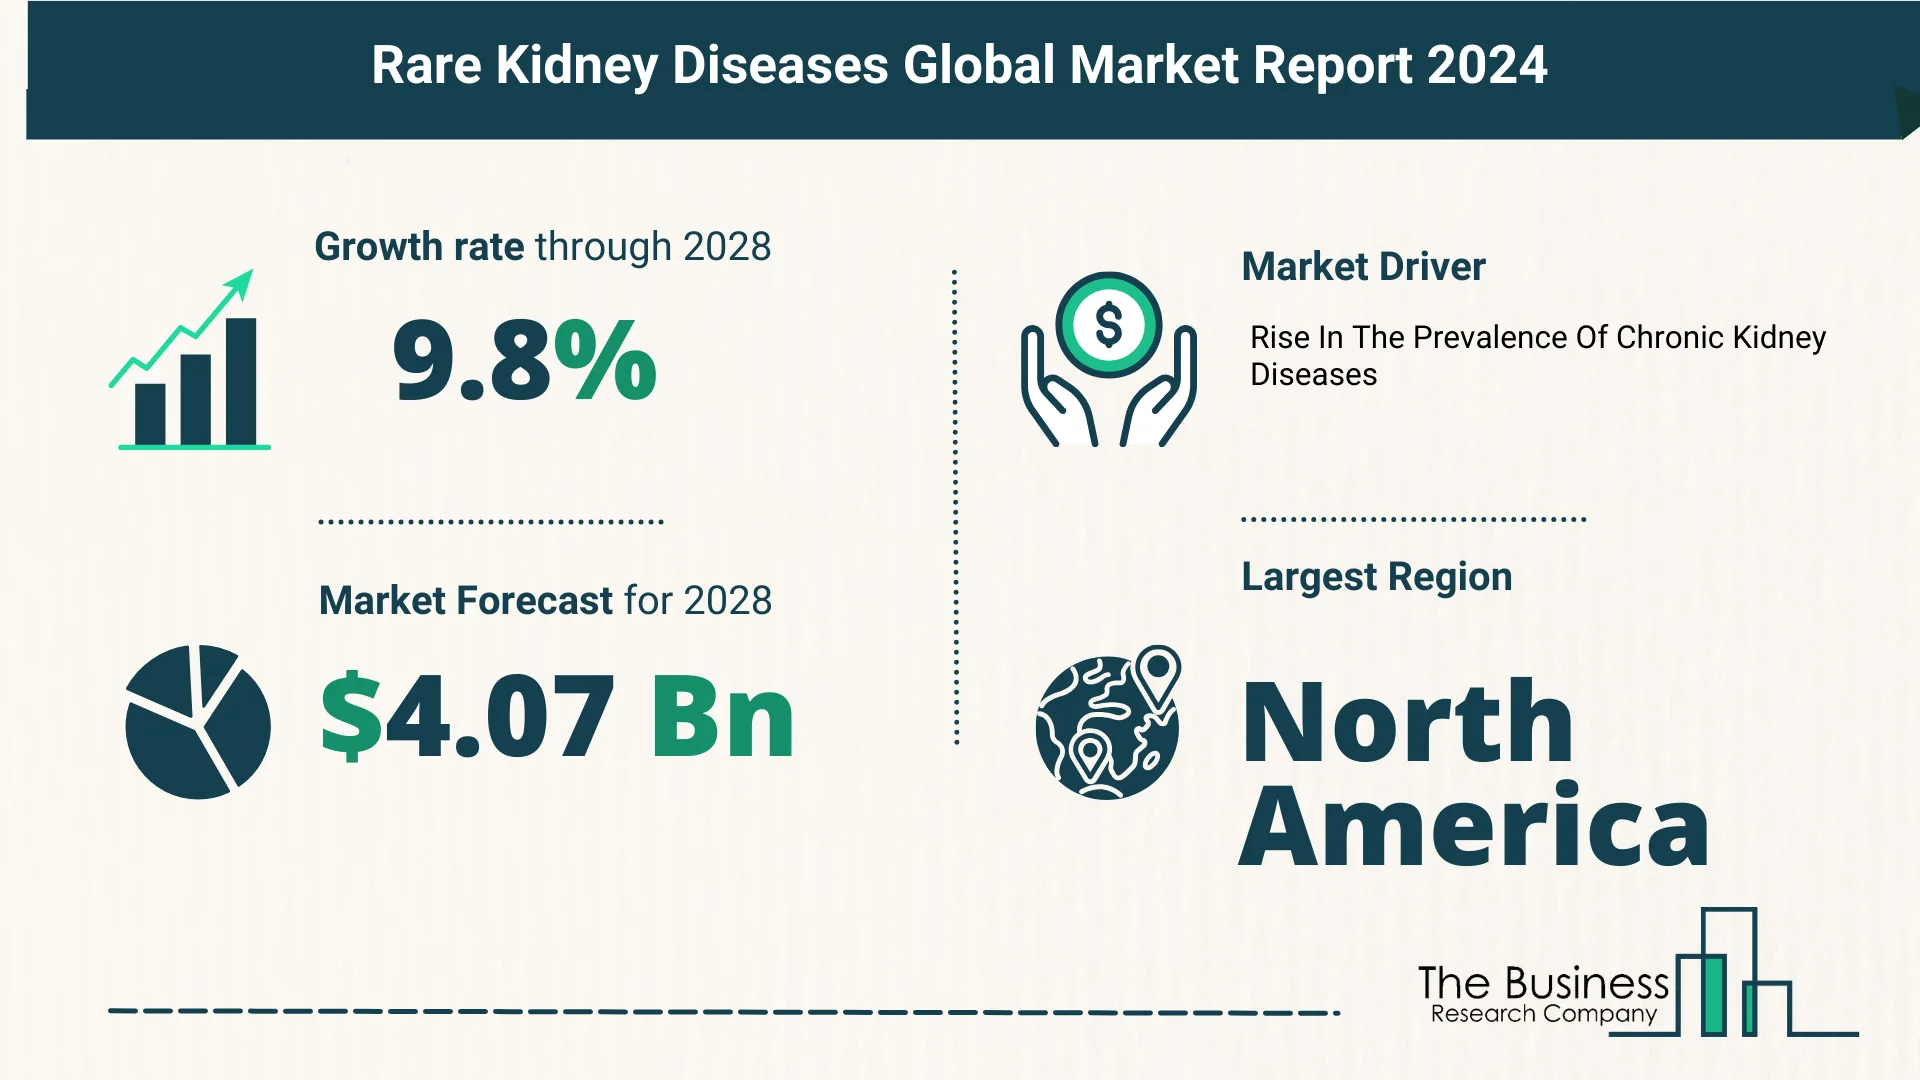 Top 5 Insights From The Rare Kidney Diseases Market Report 2024